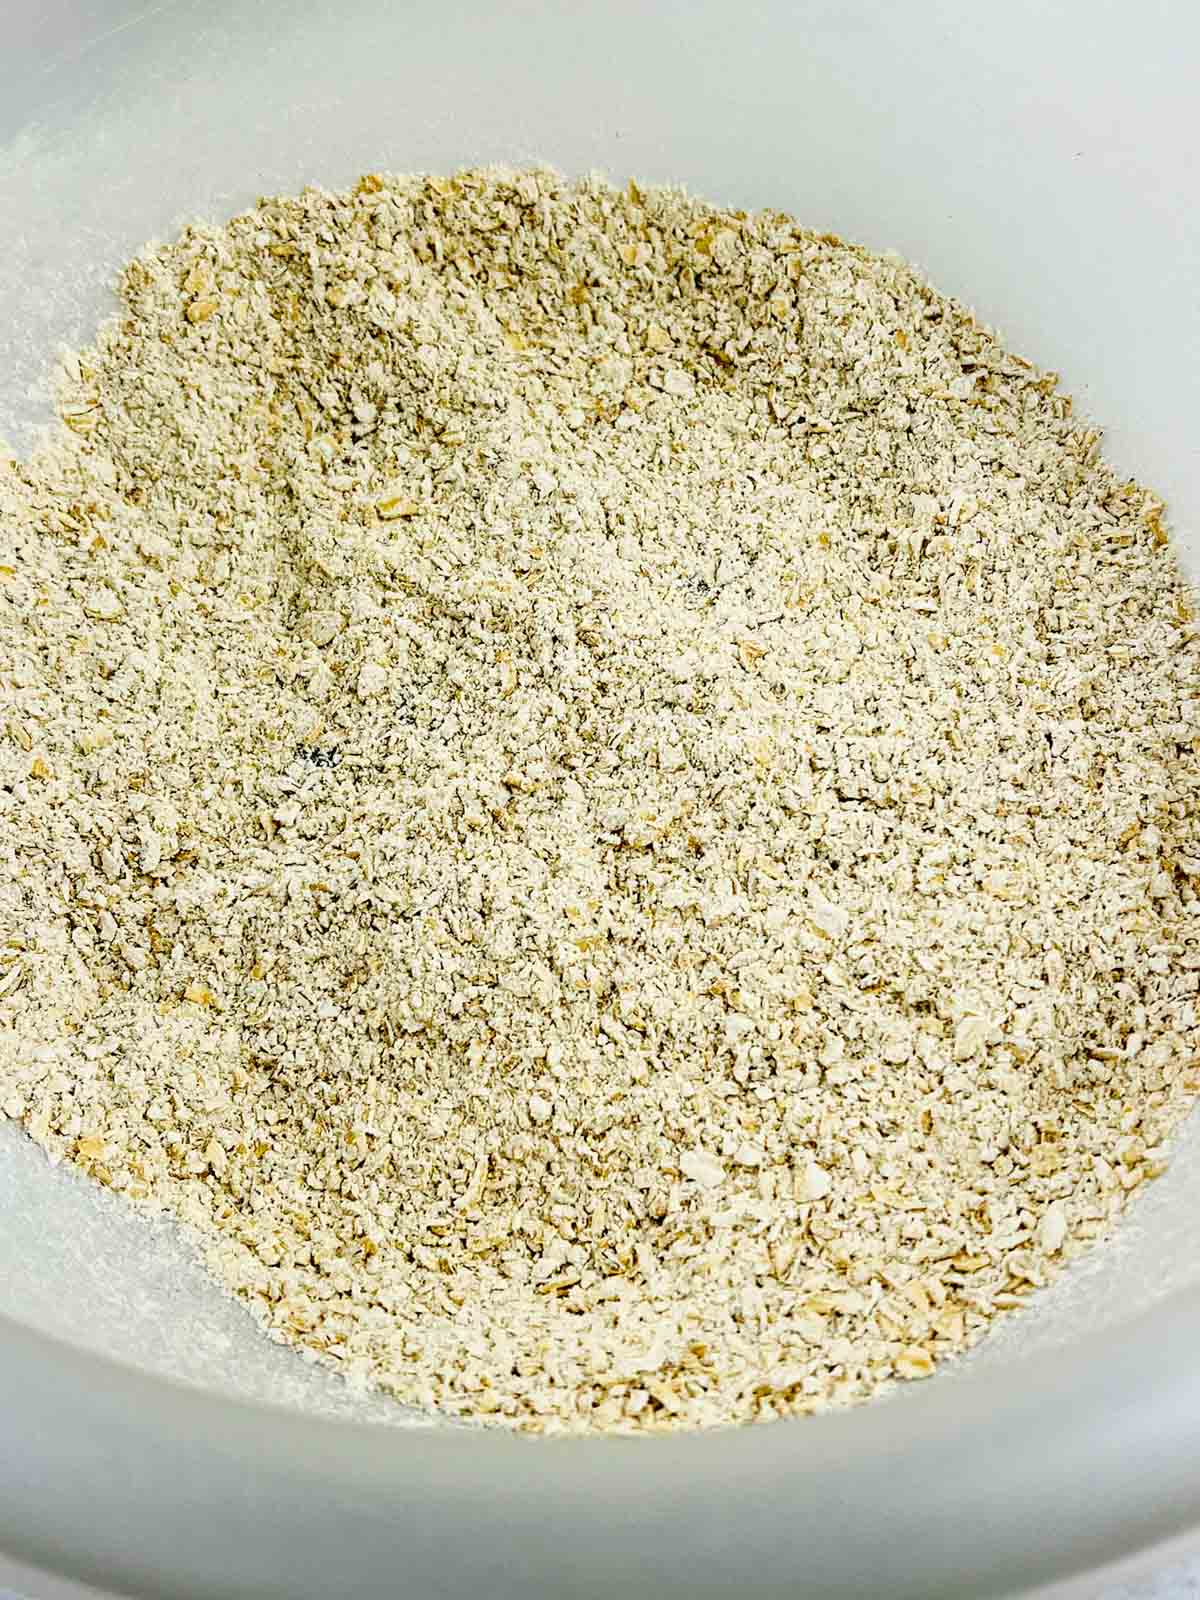 Ground up oats in a mixing bowl.